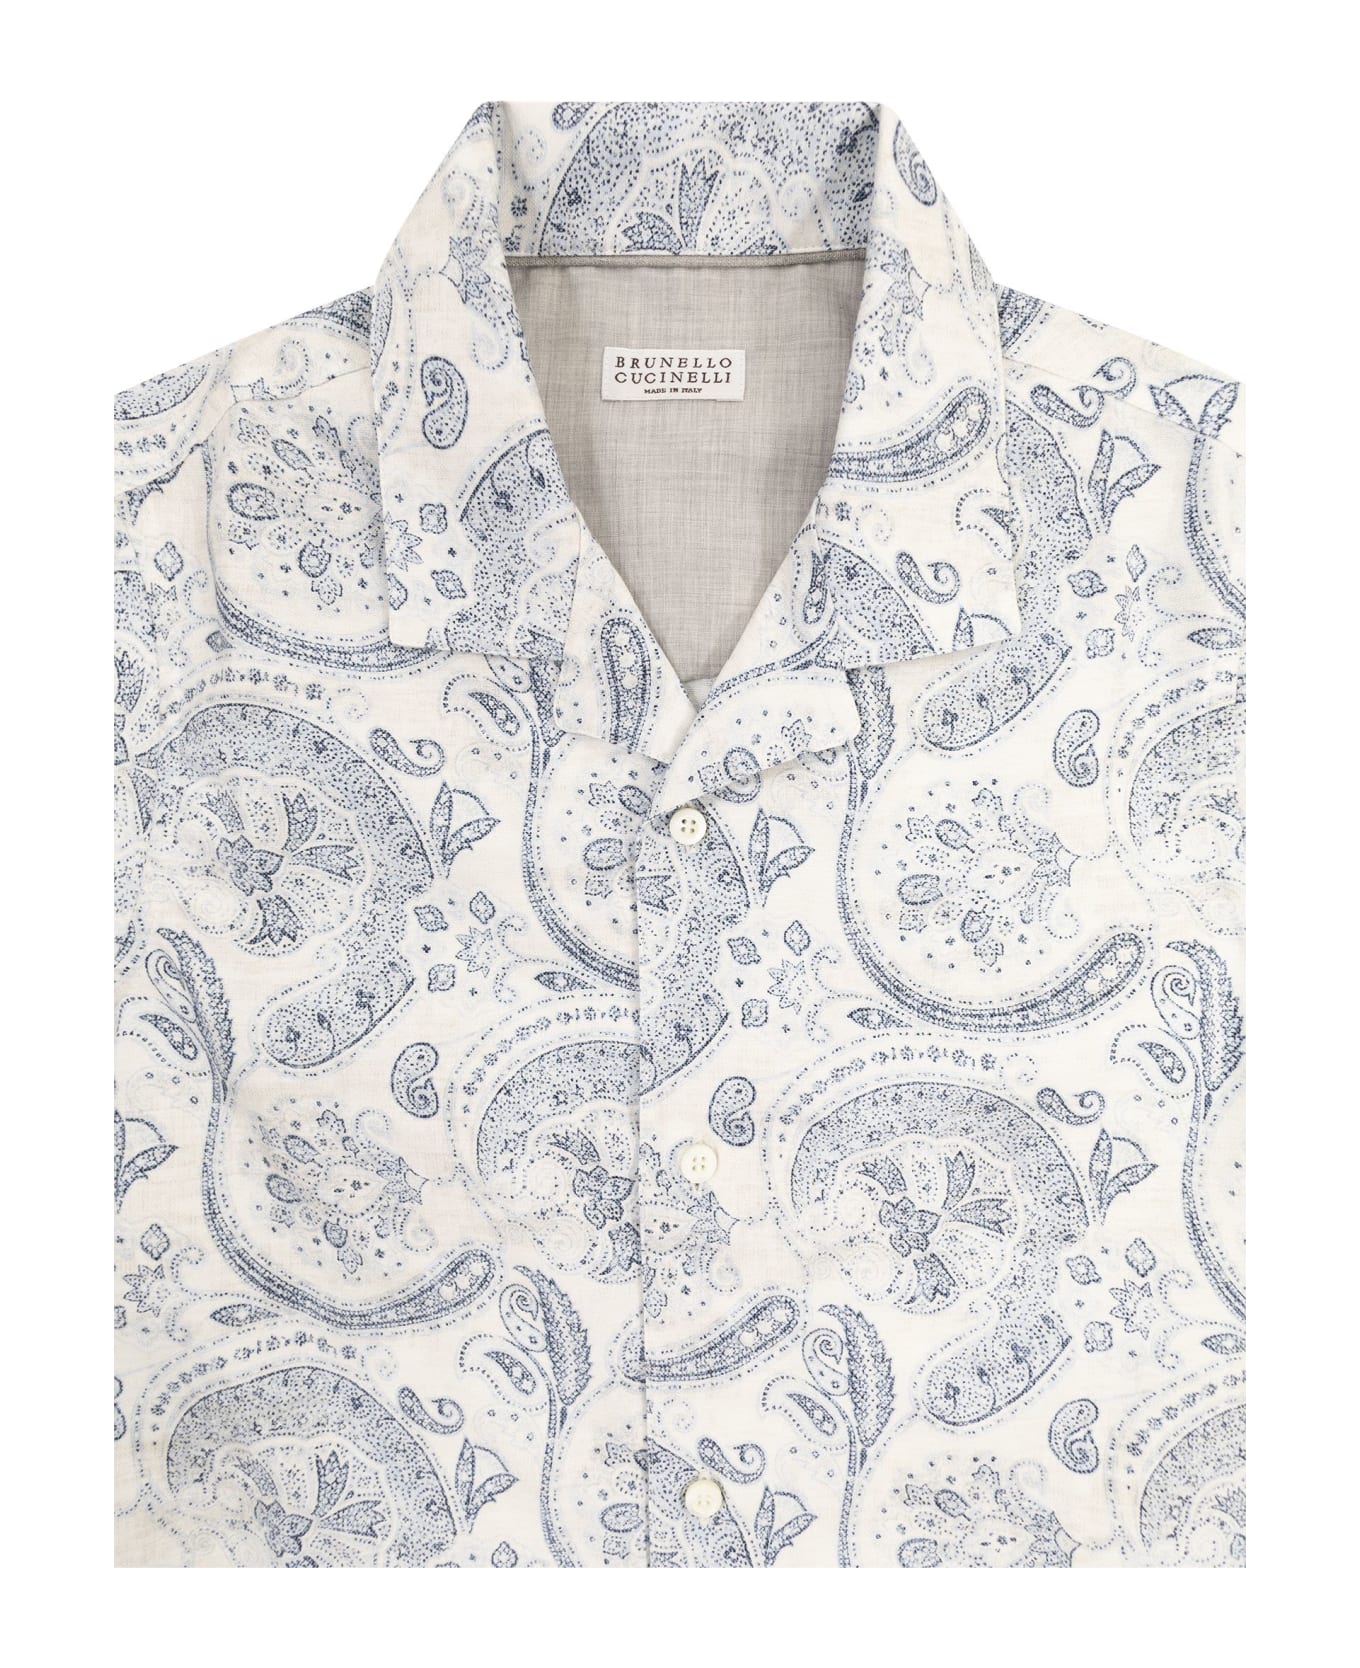 Brunello Cucinelli Paisley Print Linen Short-sleeved Shirt With Camp Collar - White/blue